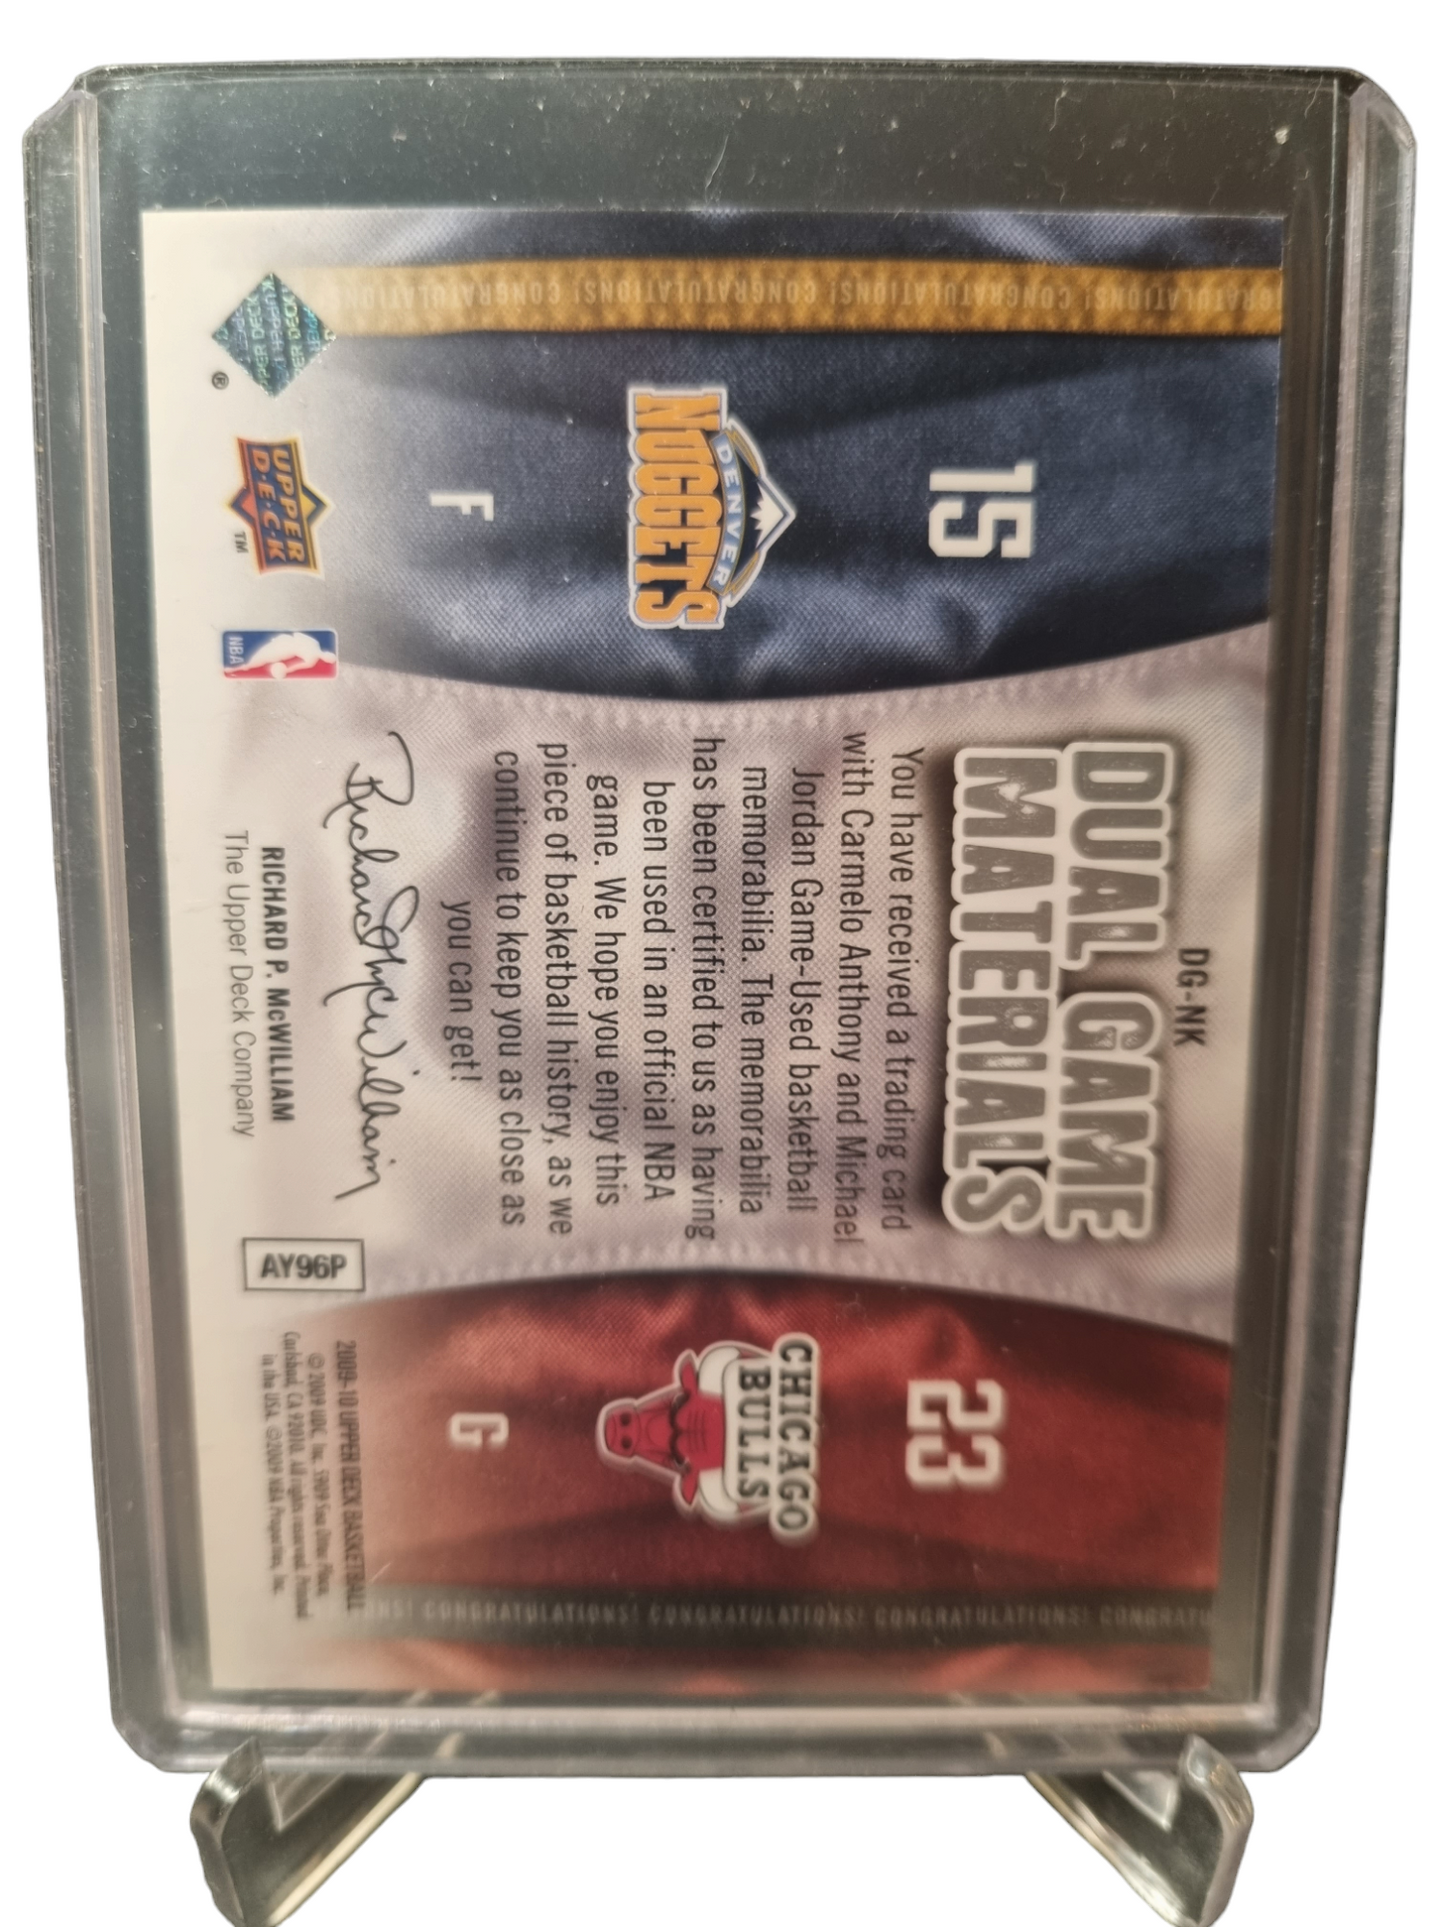 2009-10 Upper Deck #DG-NK Michael Jordan/Carmelo Anthony Duel Game Materials Game Worn Patches